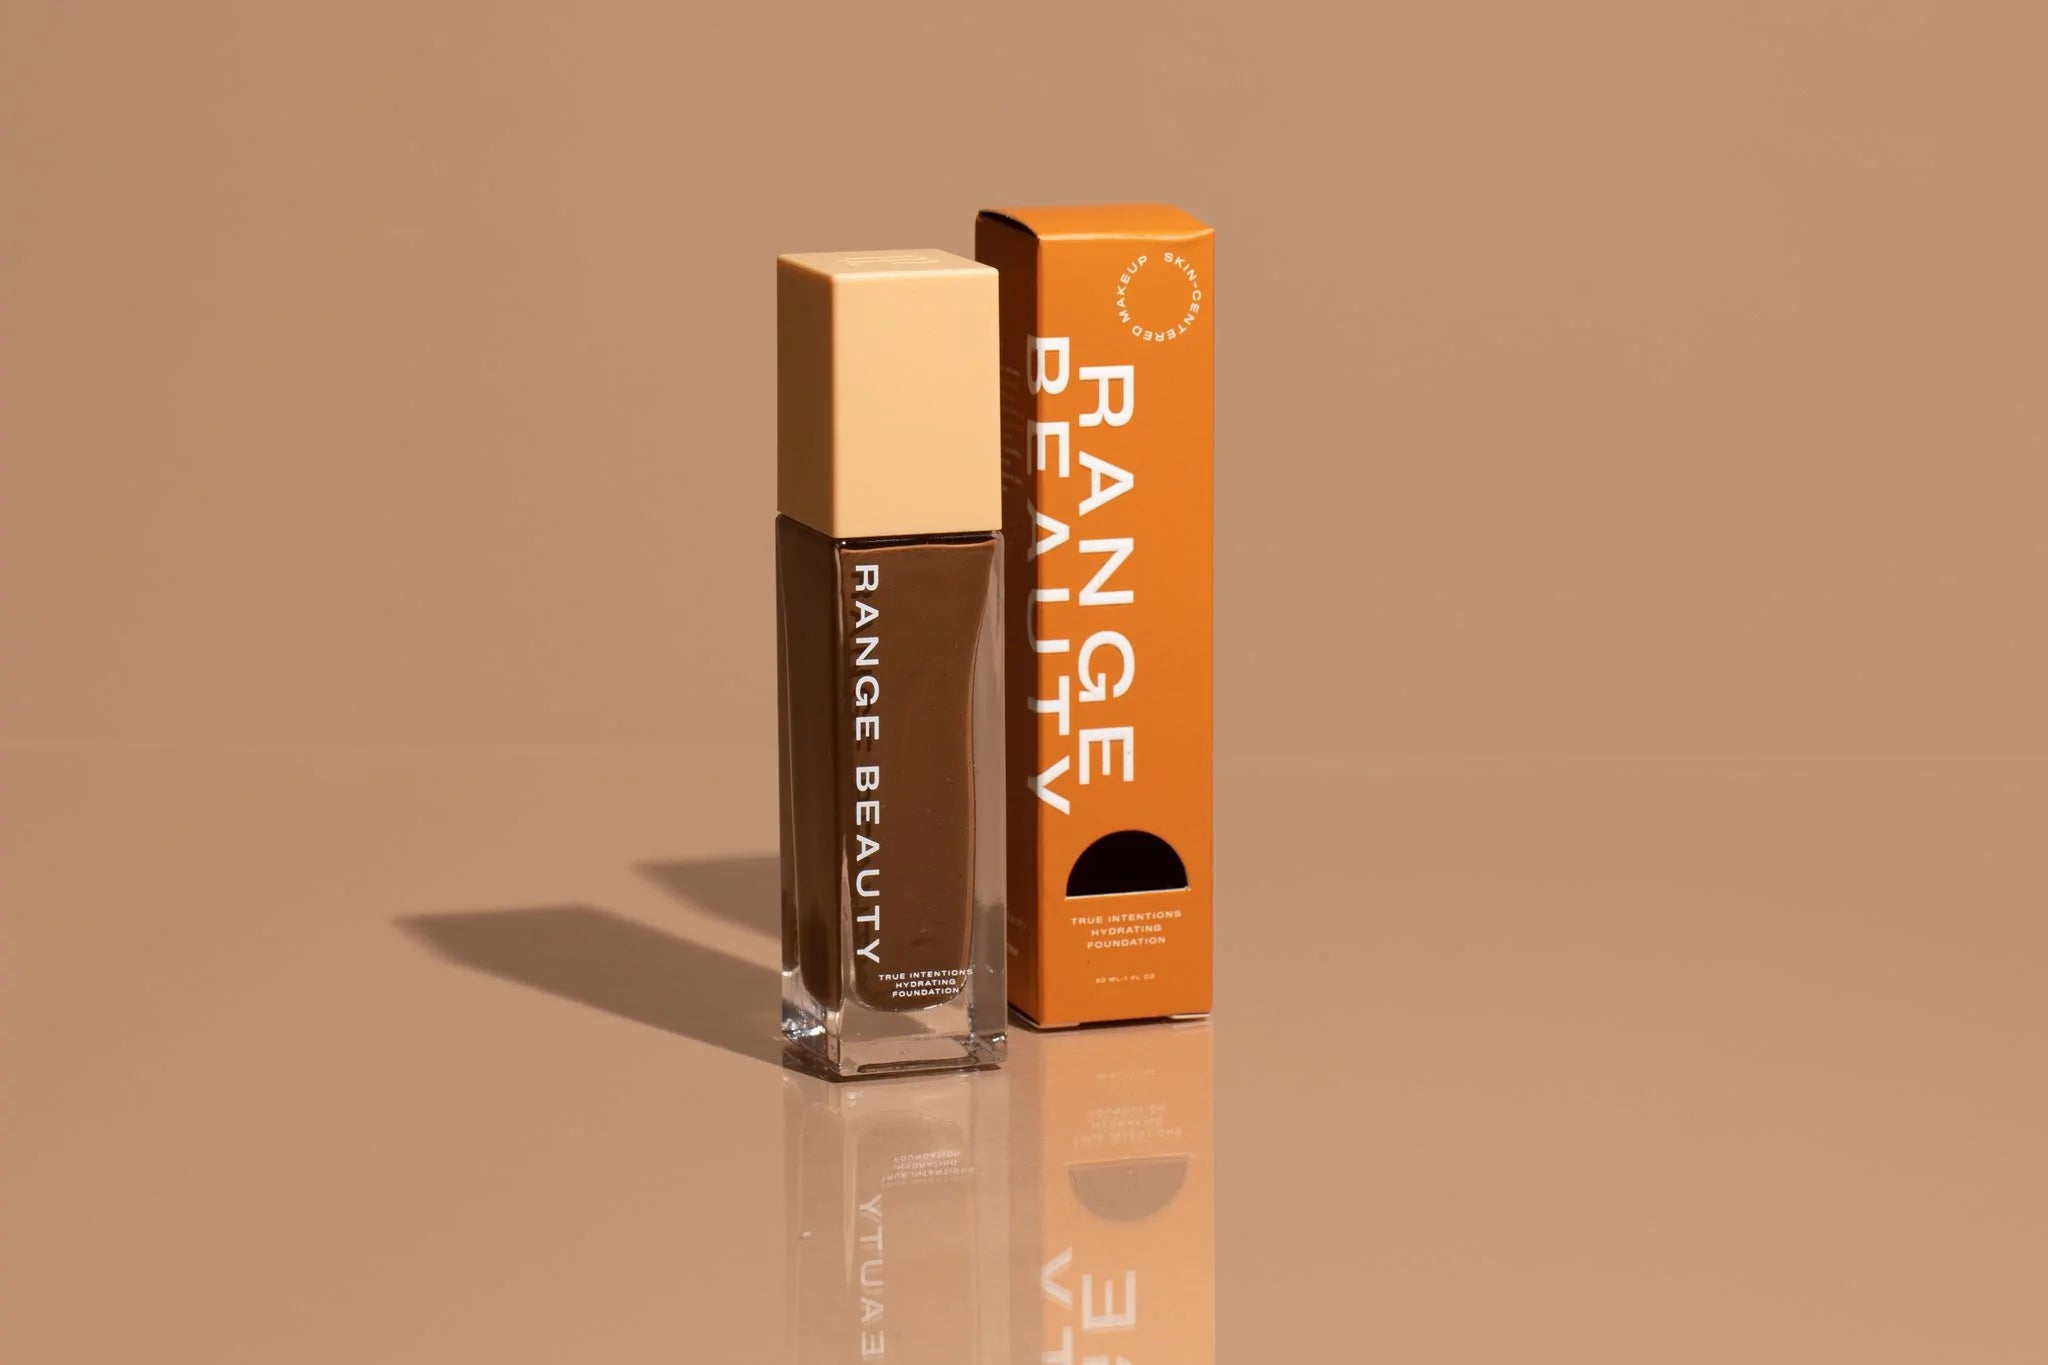 Product detail of a foundation by Range Beauty